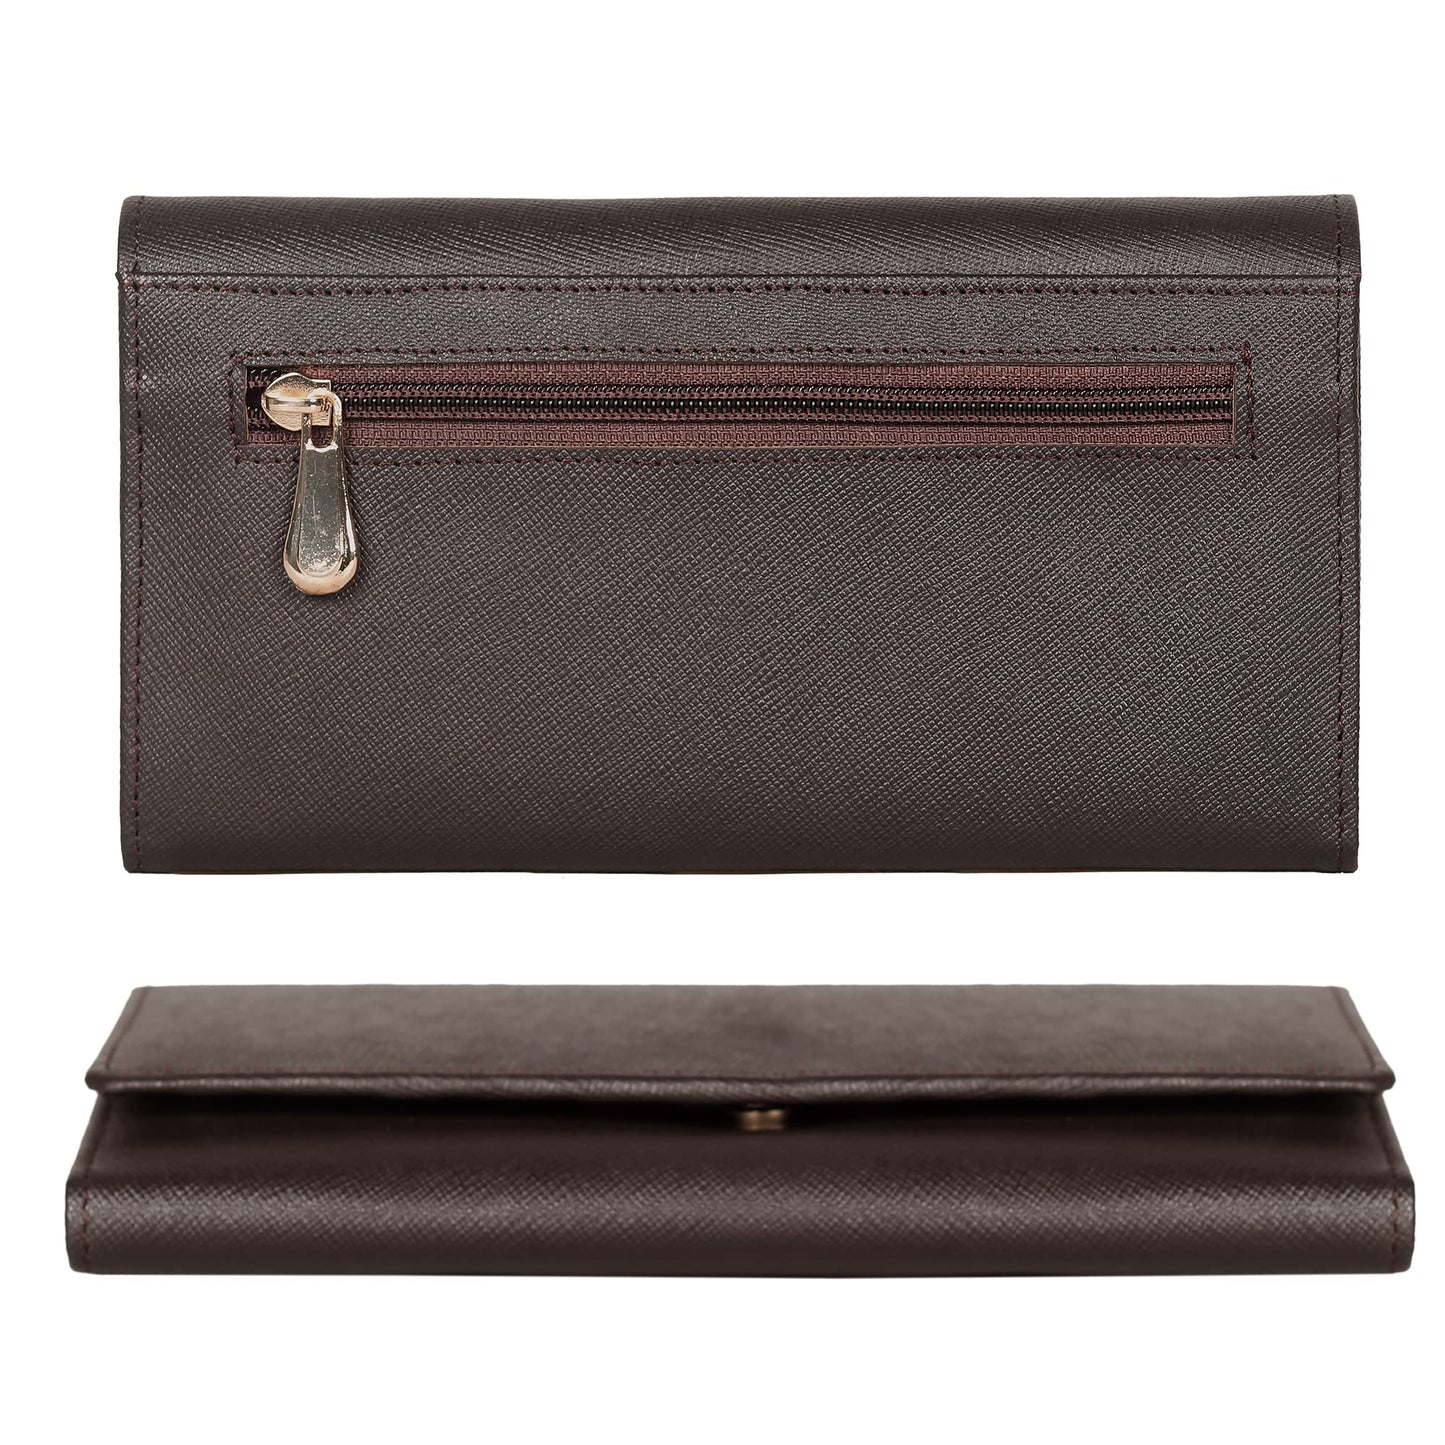 The Clownfish Jenessa Collection Genuine Leather Womens Wallet Clutch Ladies Purse with Multiple Card Slots  ID Card Window Dark Chocolate Brown